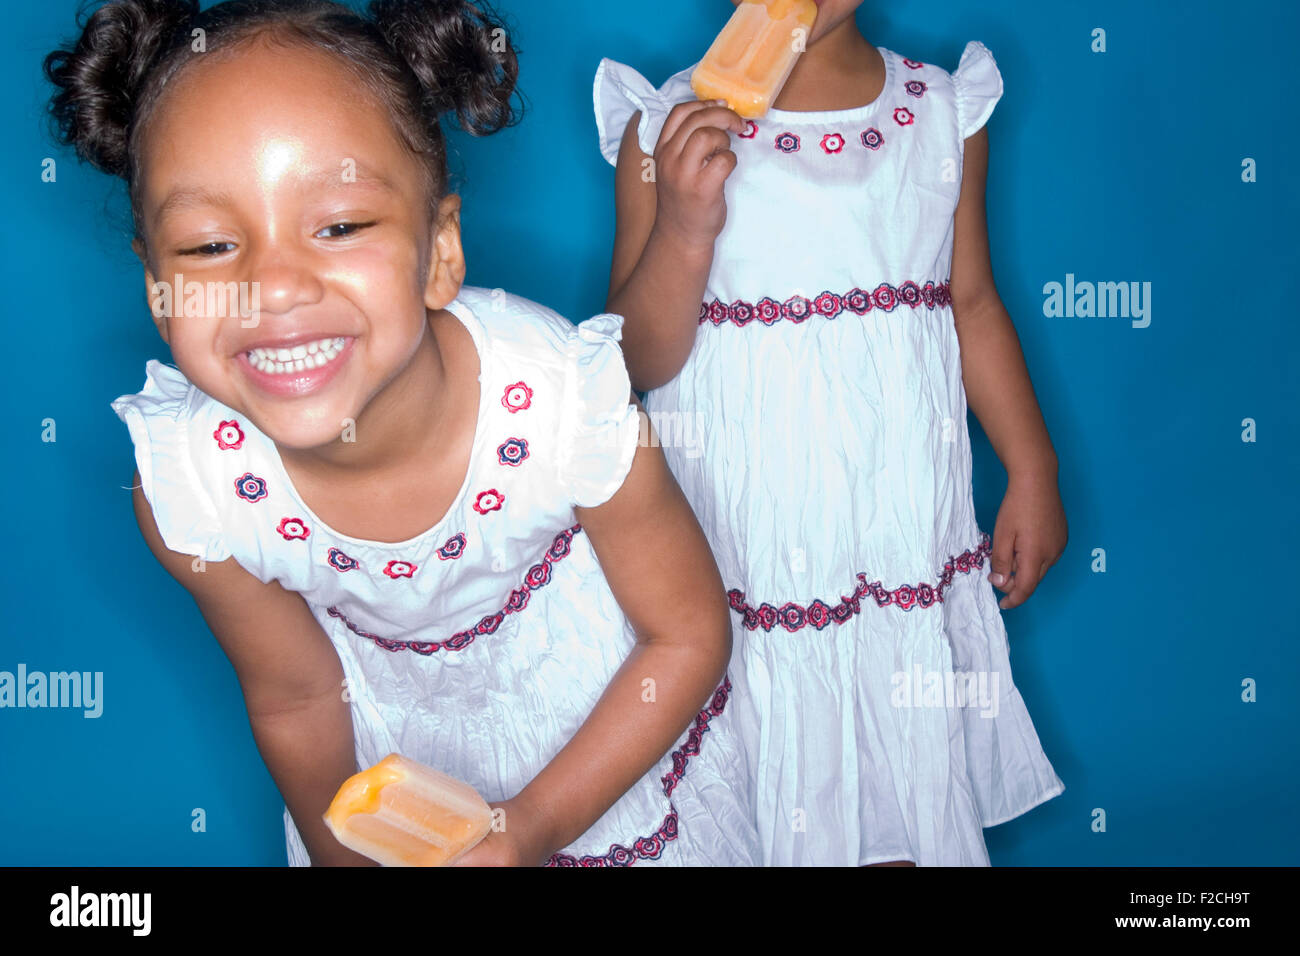 two identical twin girls eat popscicles on blue backgrounds Stock Photo